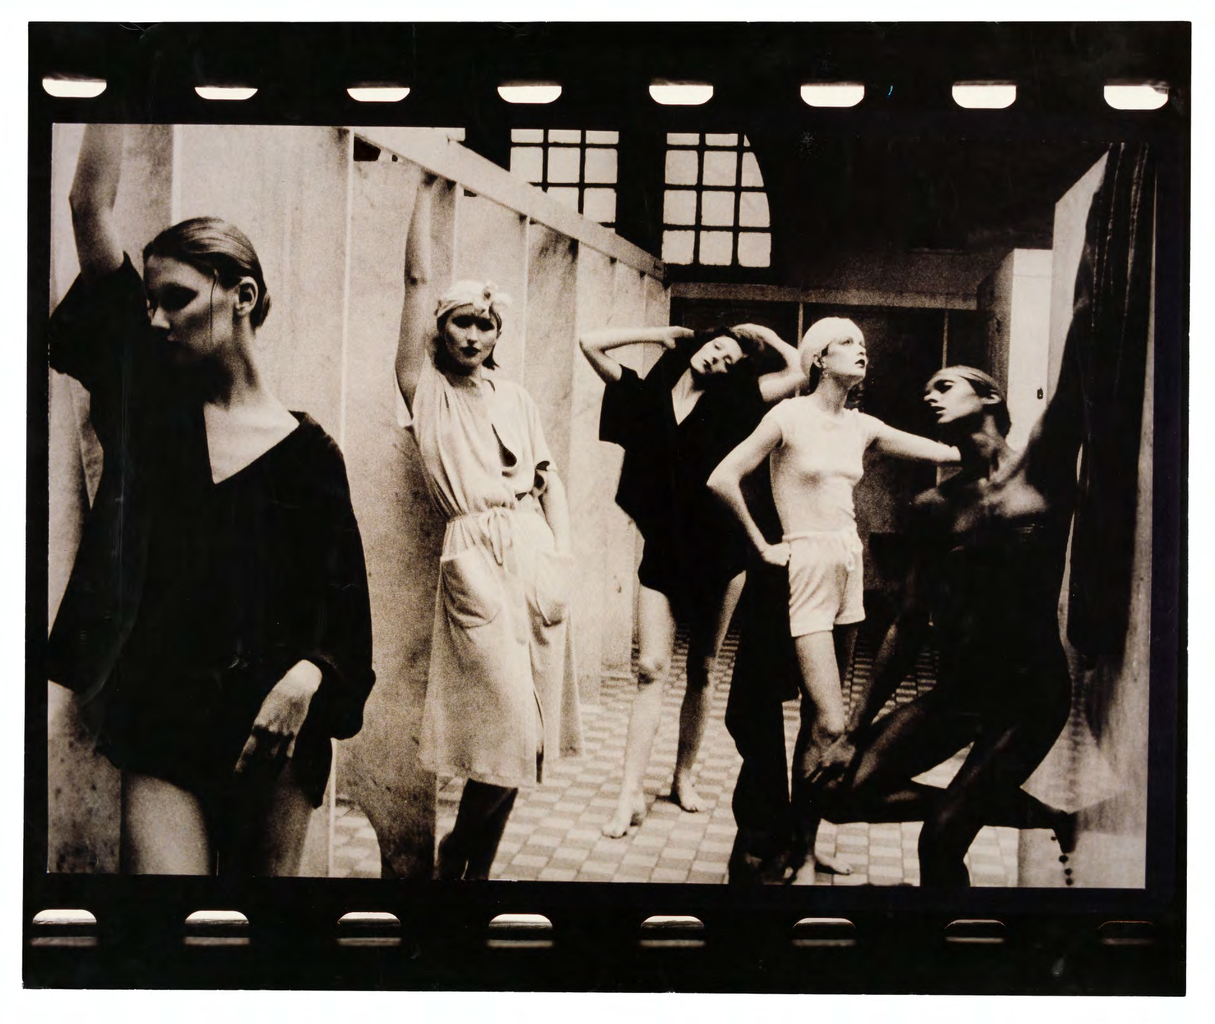 A black and white chromogenic photograph of five standing women from Deborah Turbeville\'s \'Otherworldly\' collection from the 1975 vogue catalogue.